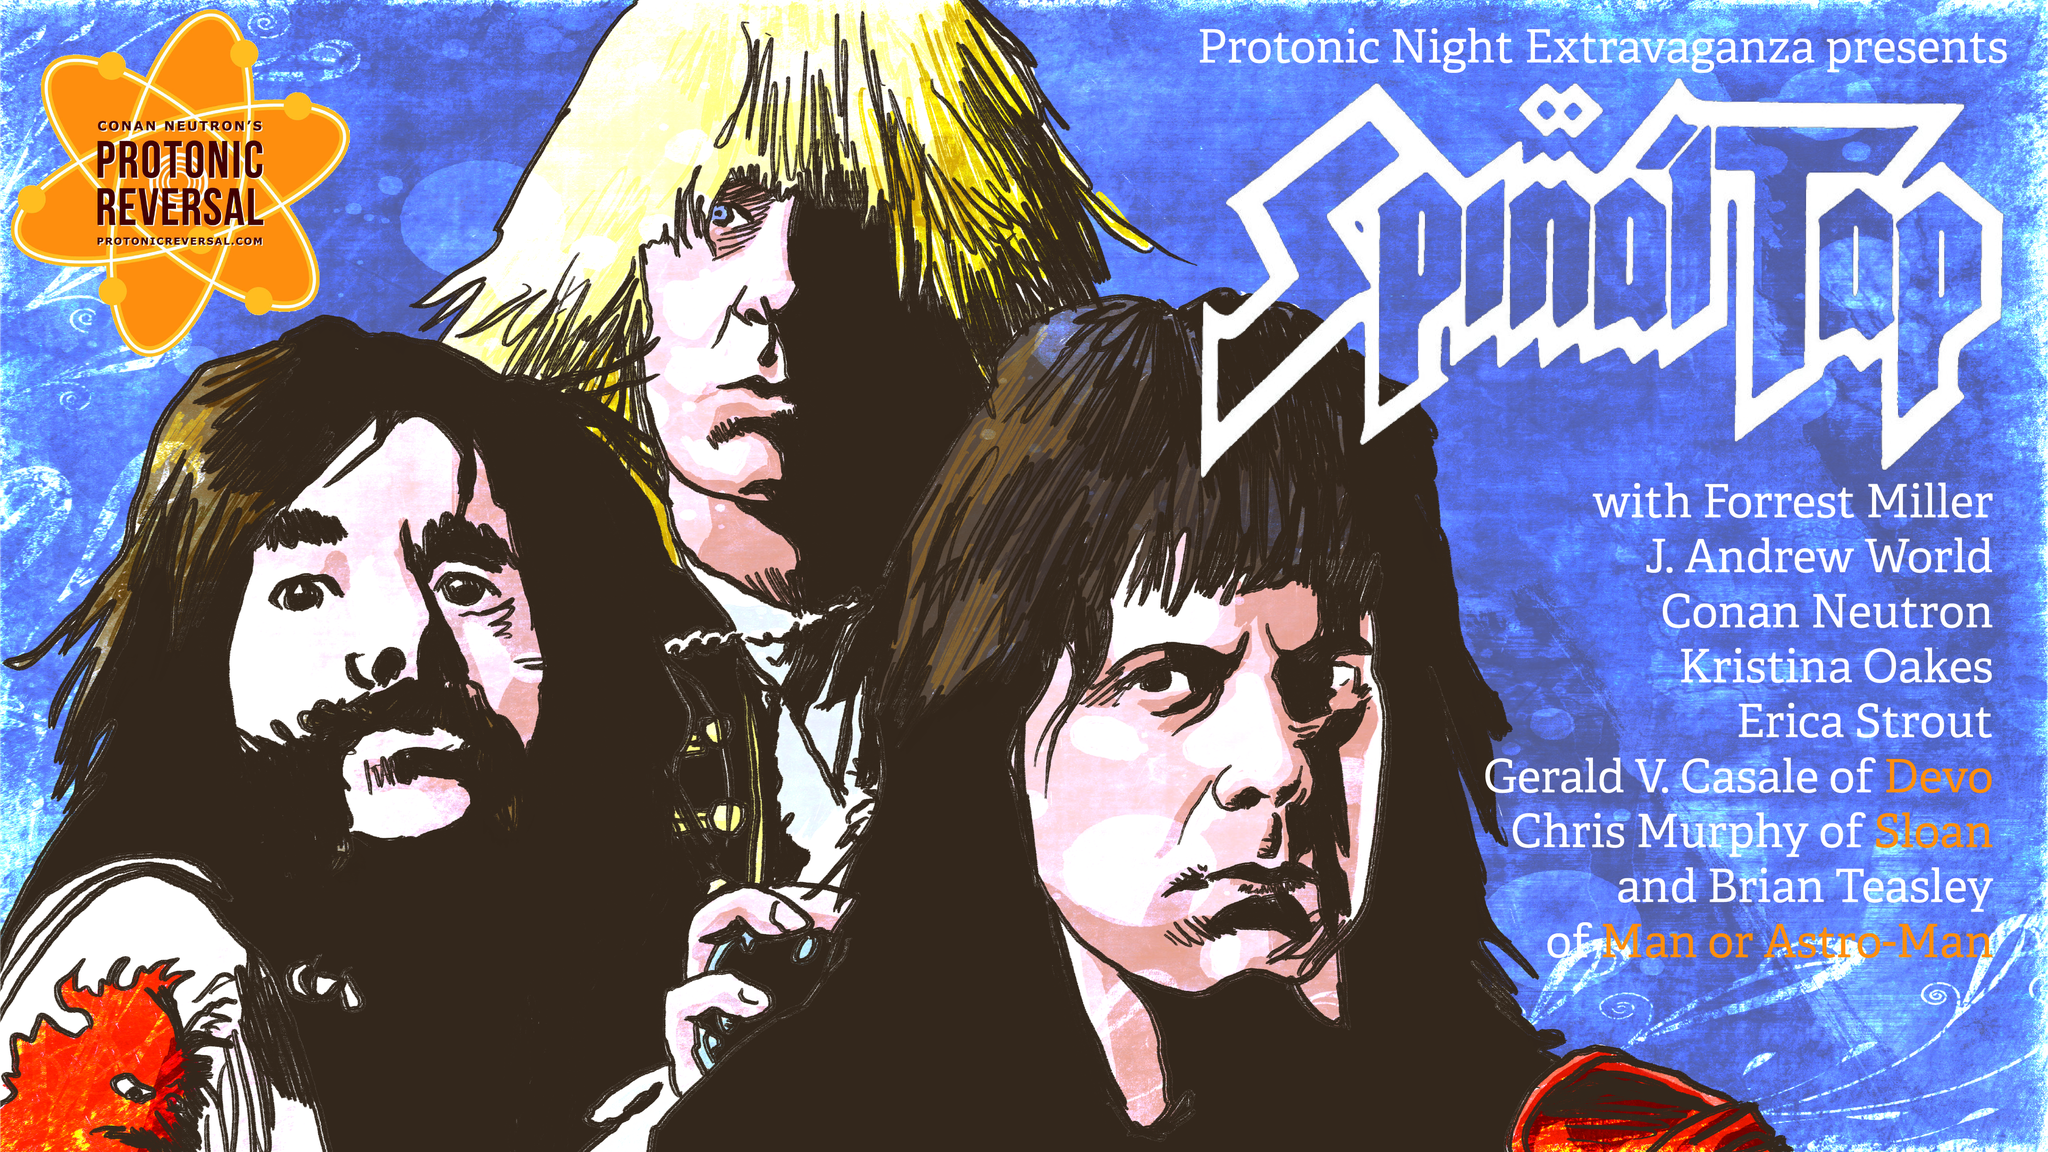 Protonic Reversal / Movie Night Extravaganza X’over: This Is Spinal Tap w/ Gerald V. Casale (DEVO), Brian Teasley (Man… or Astro-Man?) and Chris Murphy (Sloan)